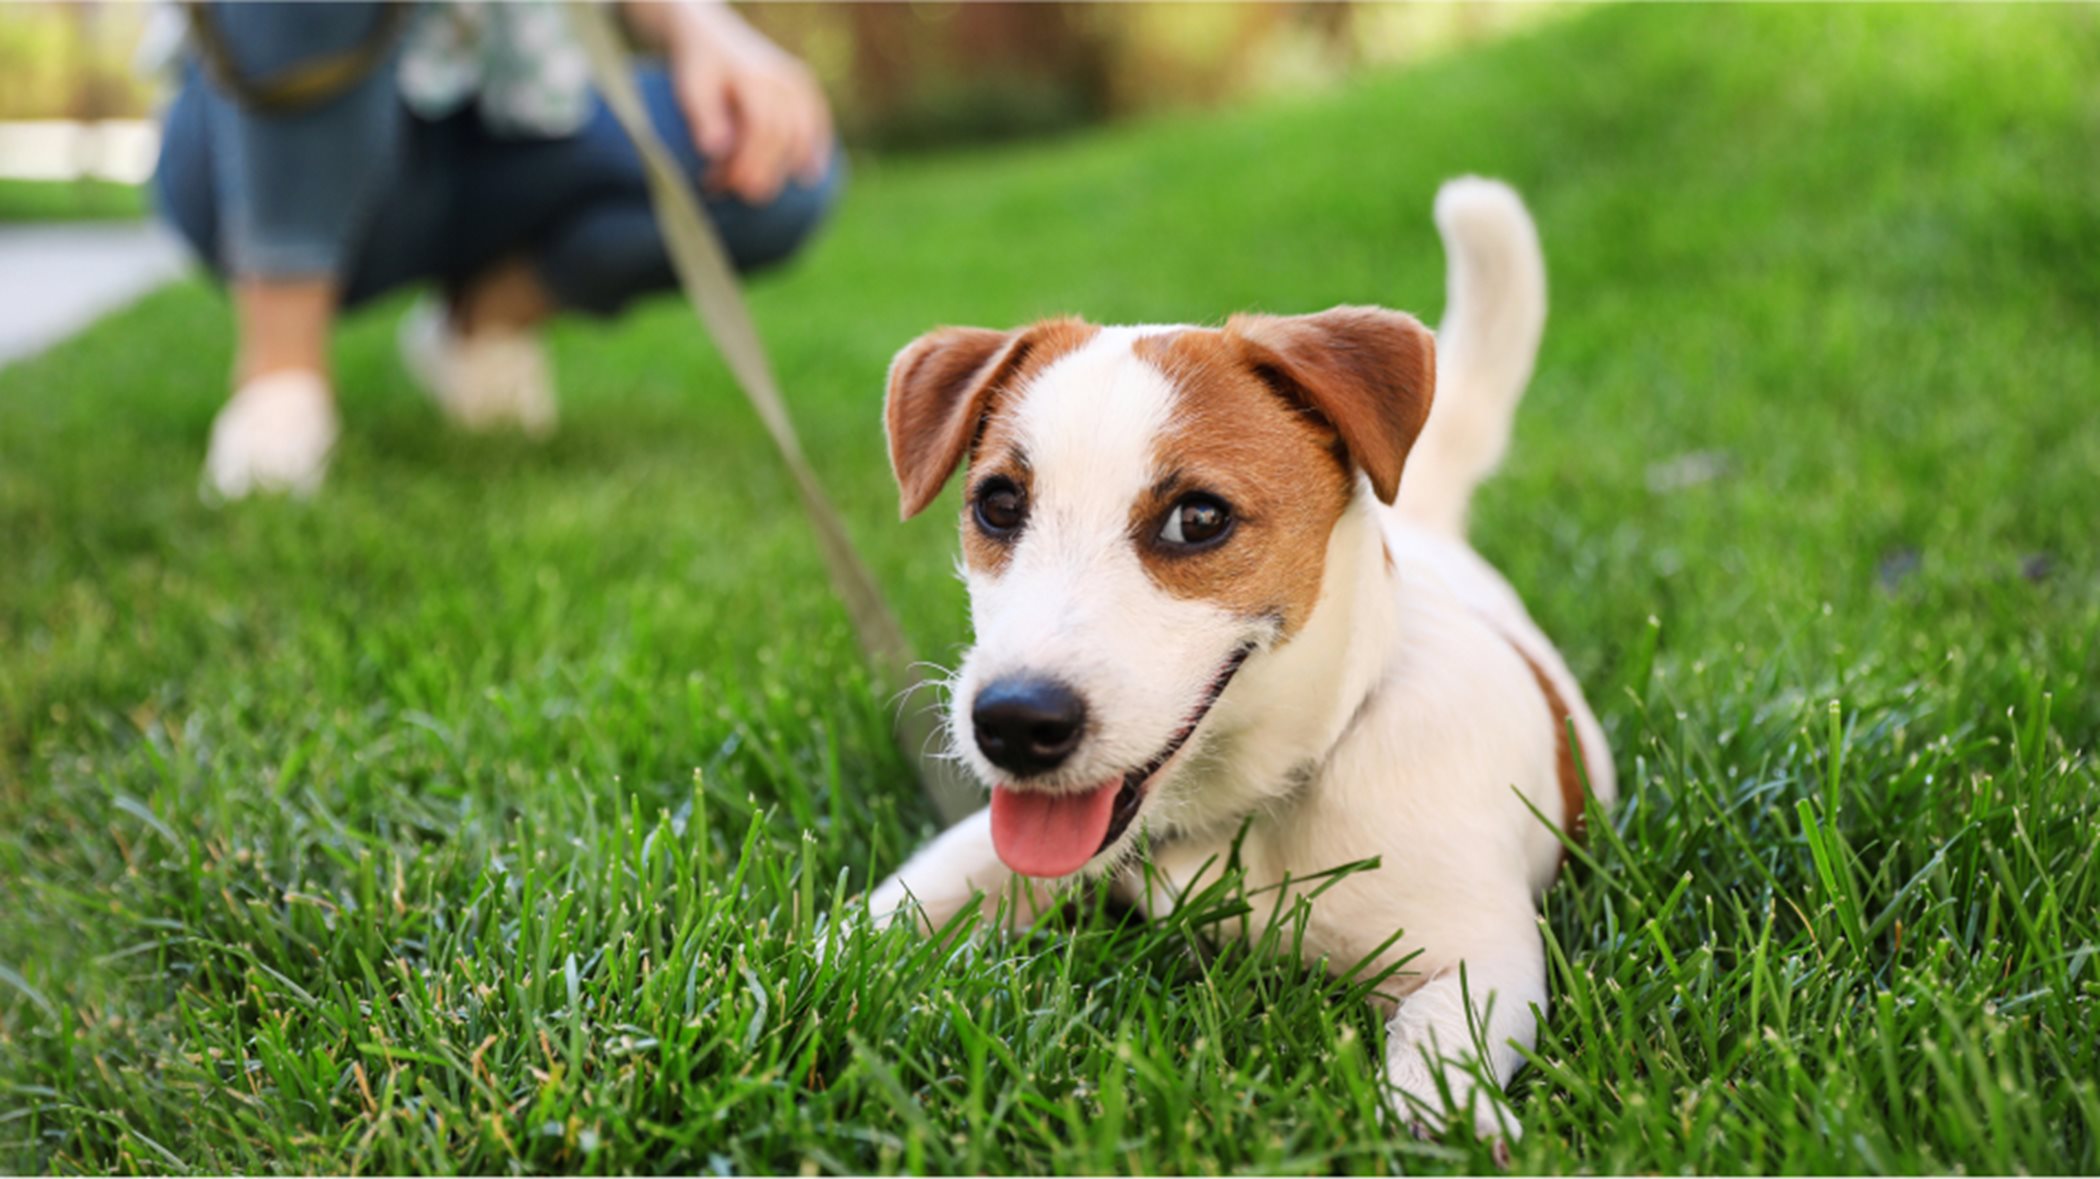 Jack Russell Terrier resting in the grass